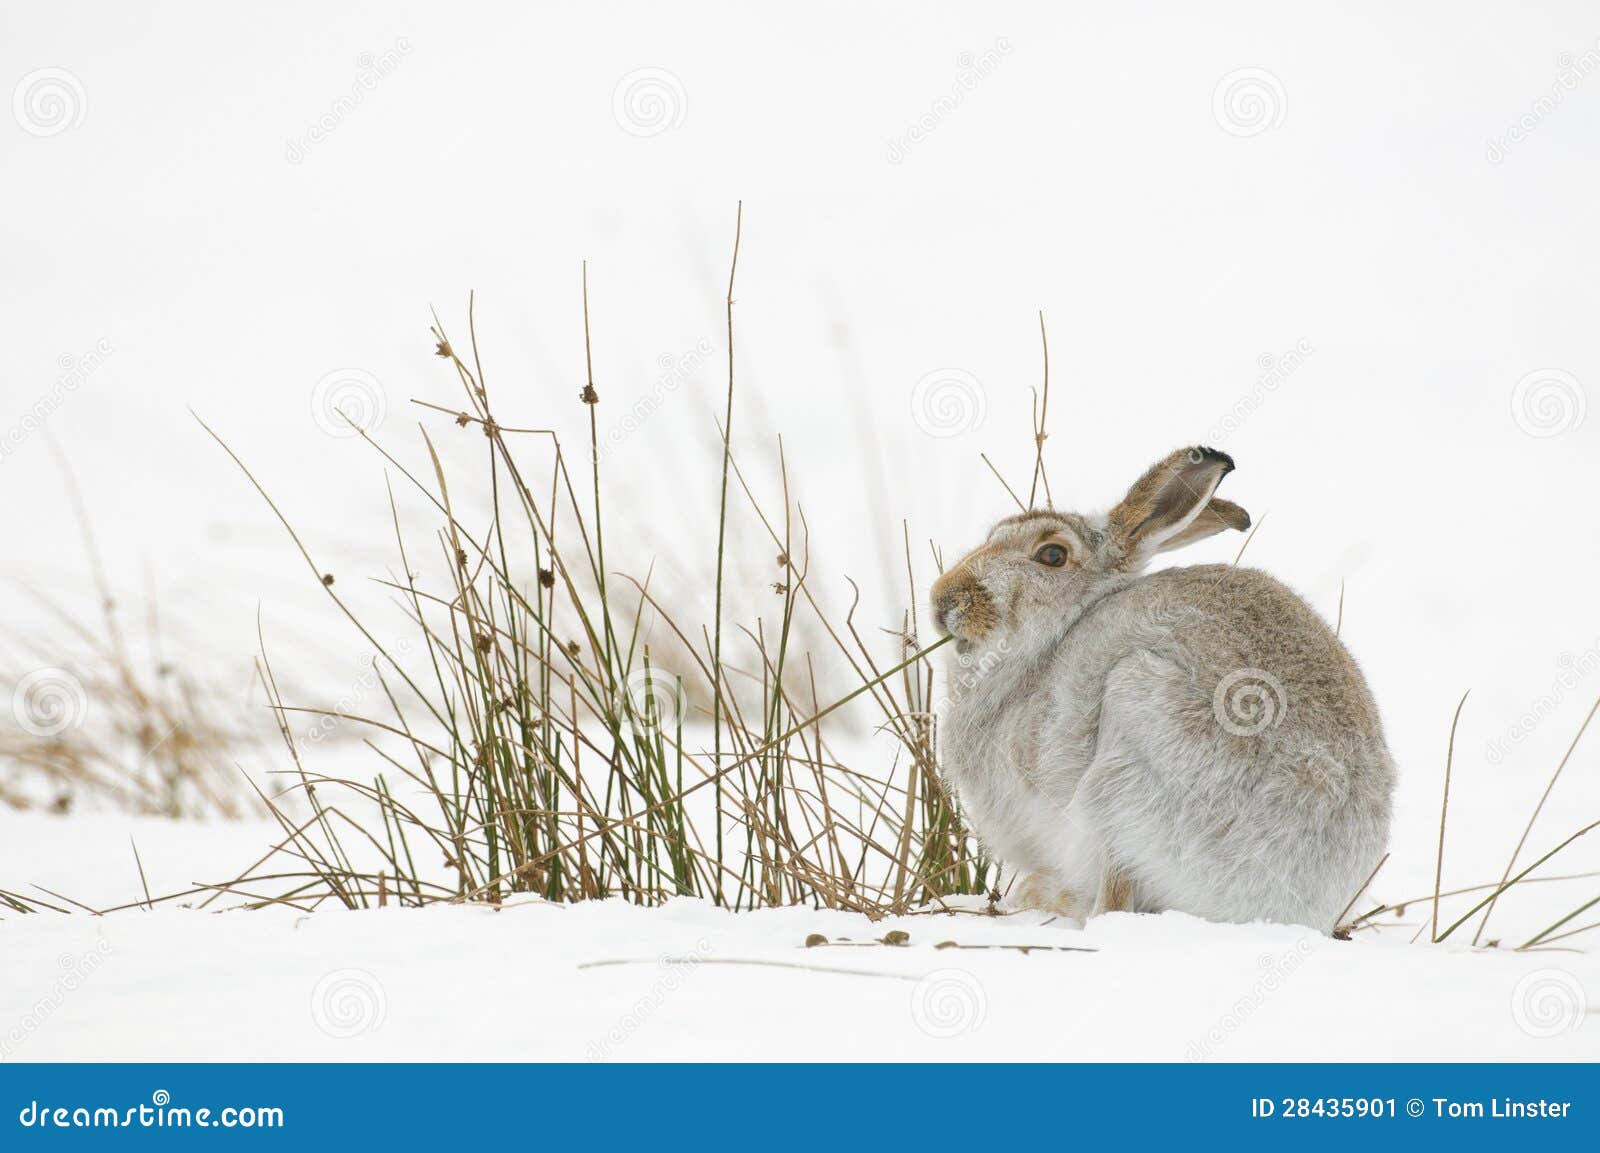 the mountain hare